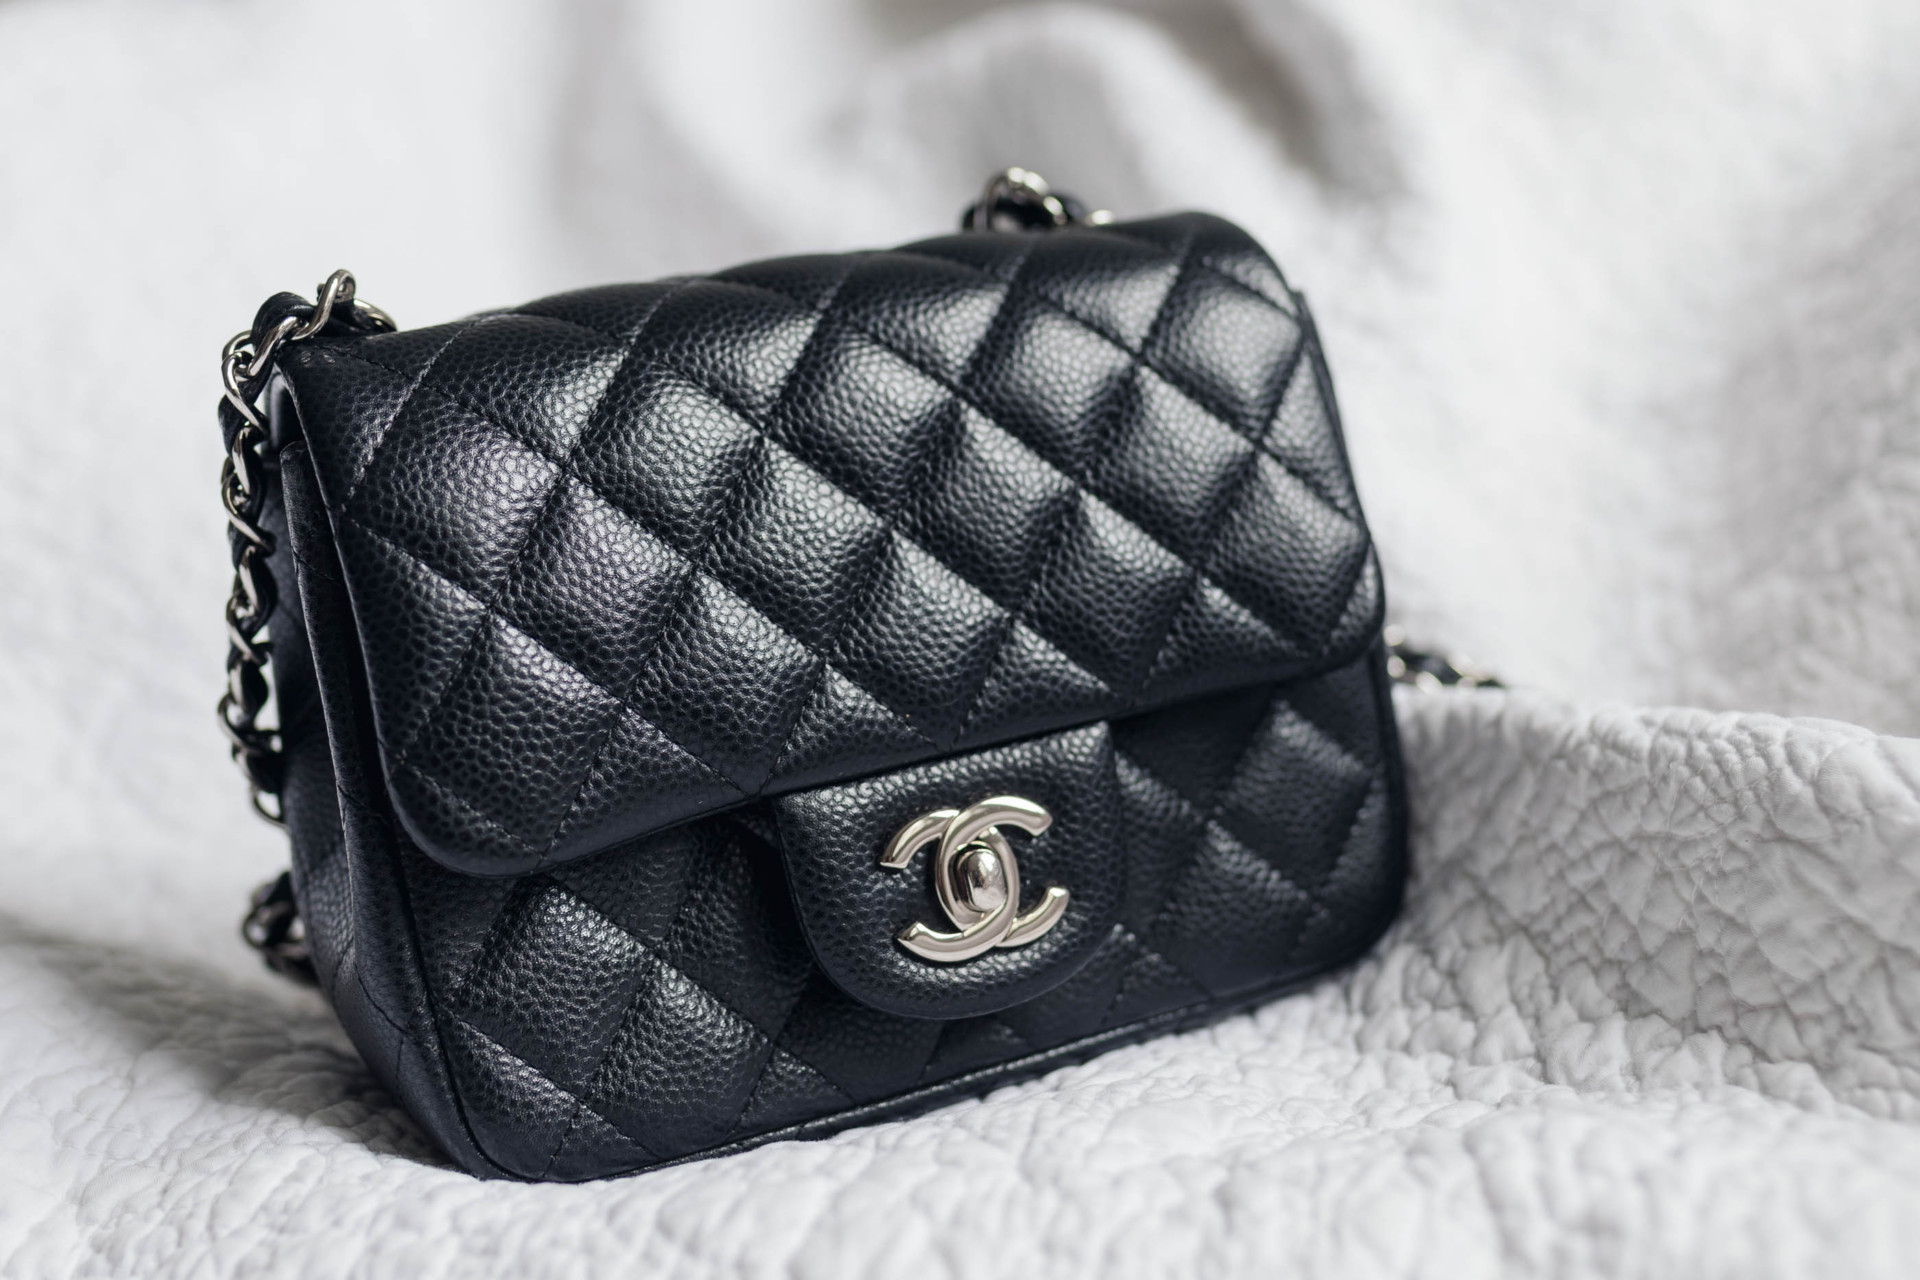 35 Chanel small flapbag outfit ideas  chanel bag, chanel, chanel bag  classic